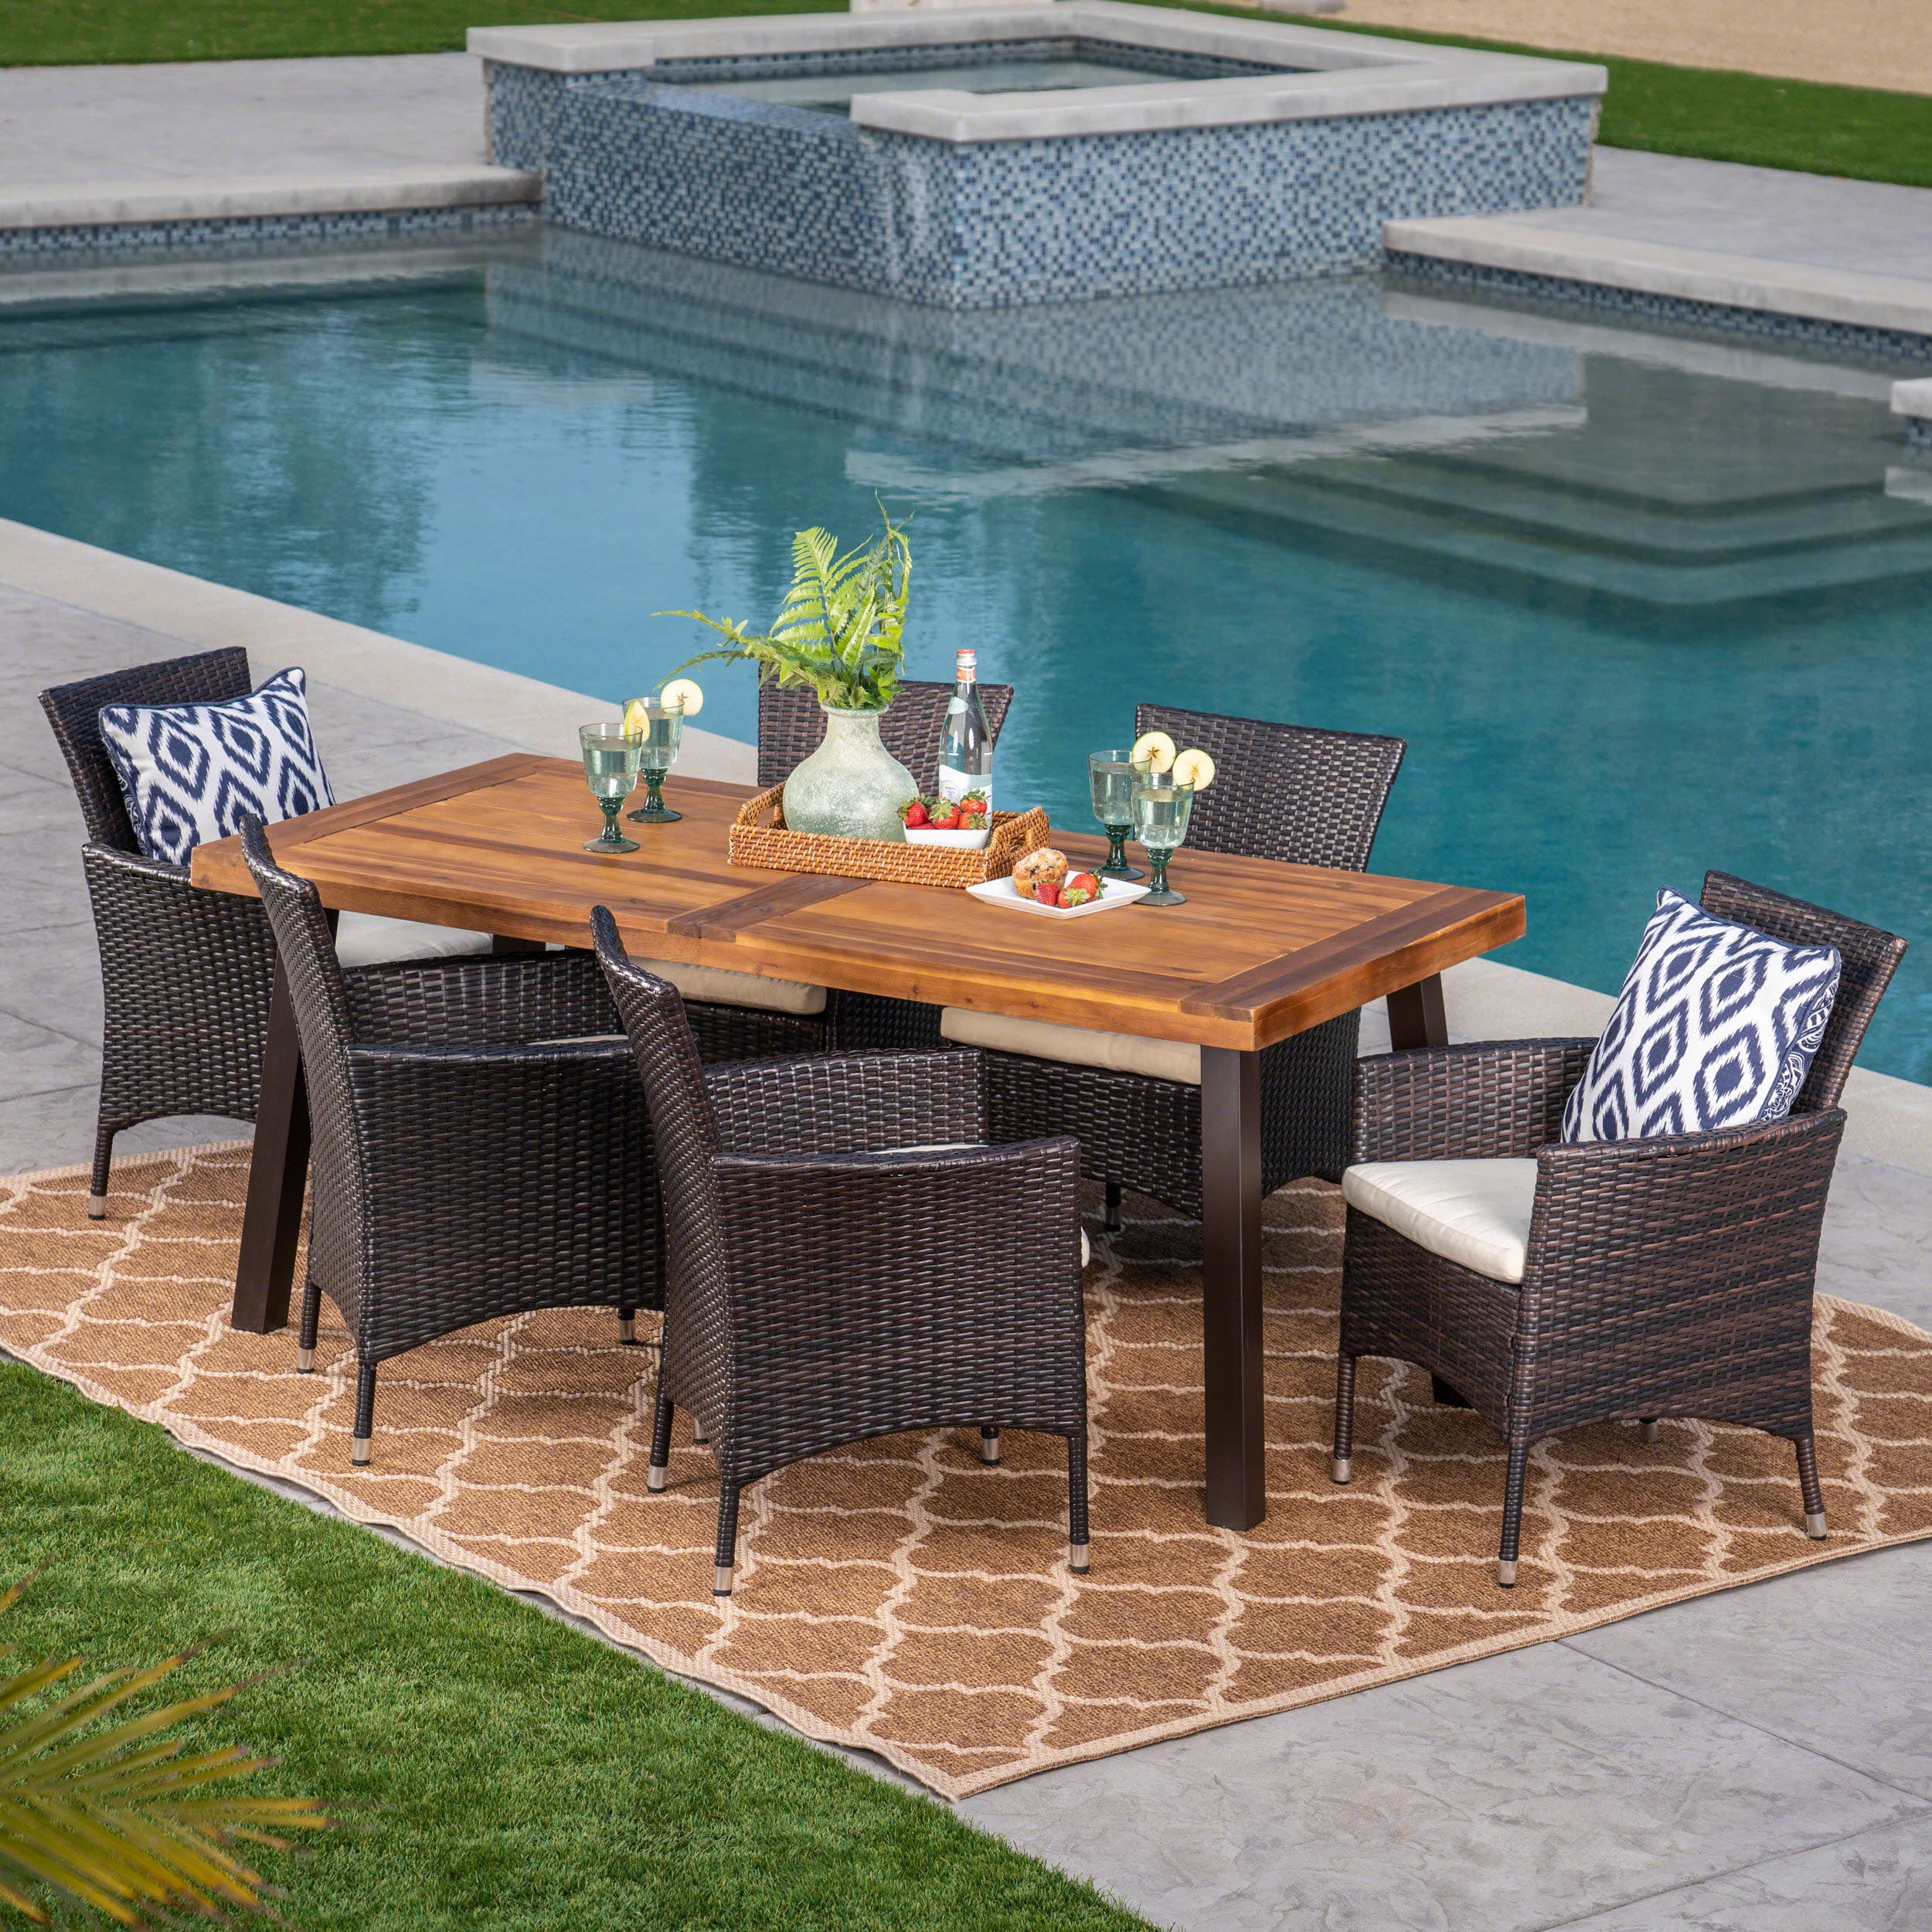 7 Piece Acacia Wood Wicker Dining Set, Wooden Outdoor Dining Set With Cushions